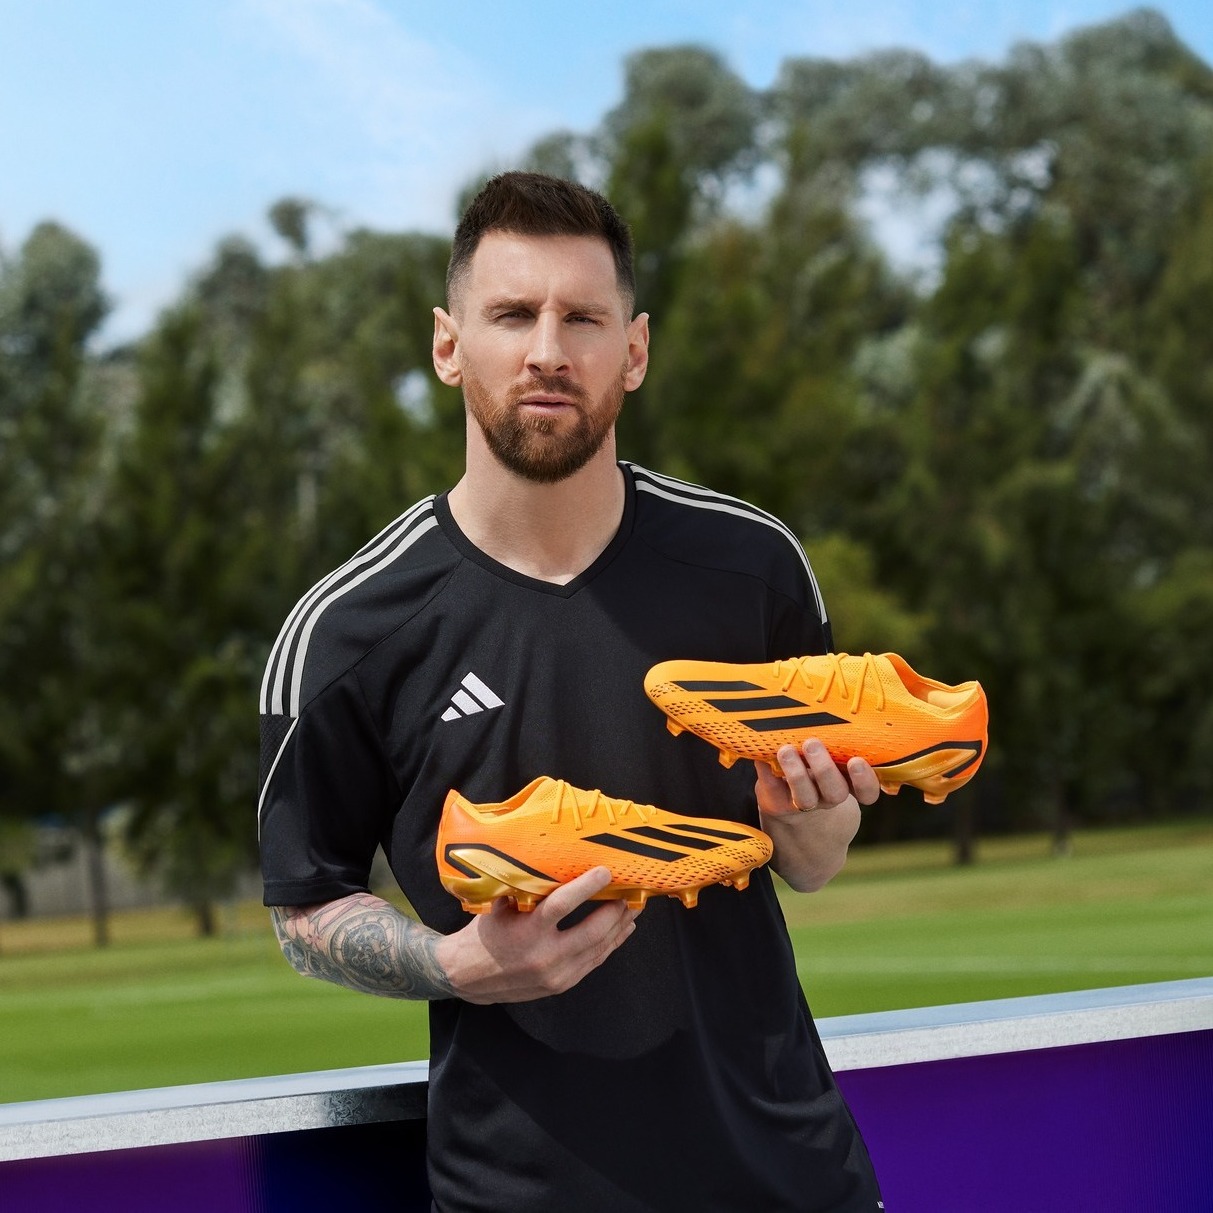 Adidas 2023 "Heatspawn" Boots Pack Released - Last Adidas 22-23 Cleats Collection To Be Worn By All Adidas Players - Footy Headlines